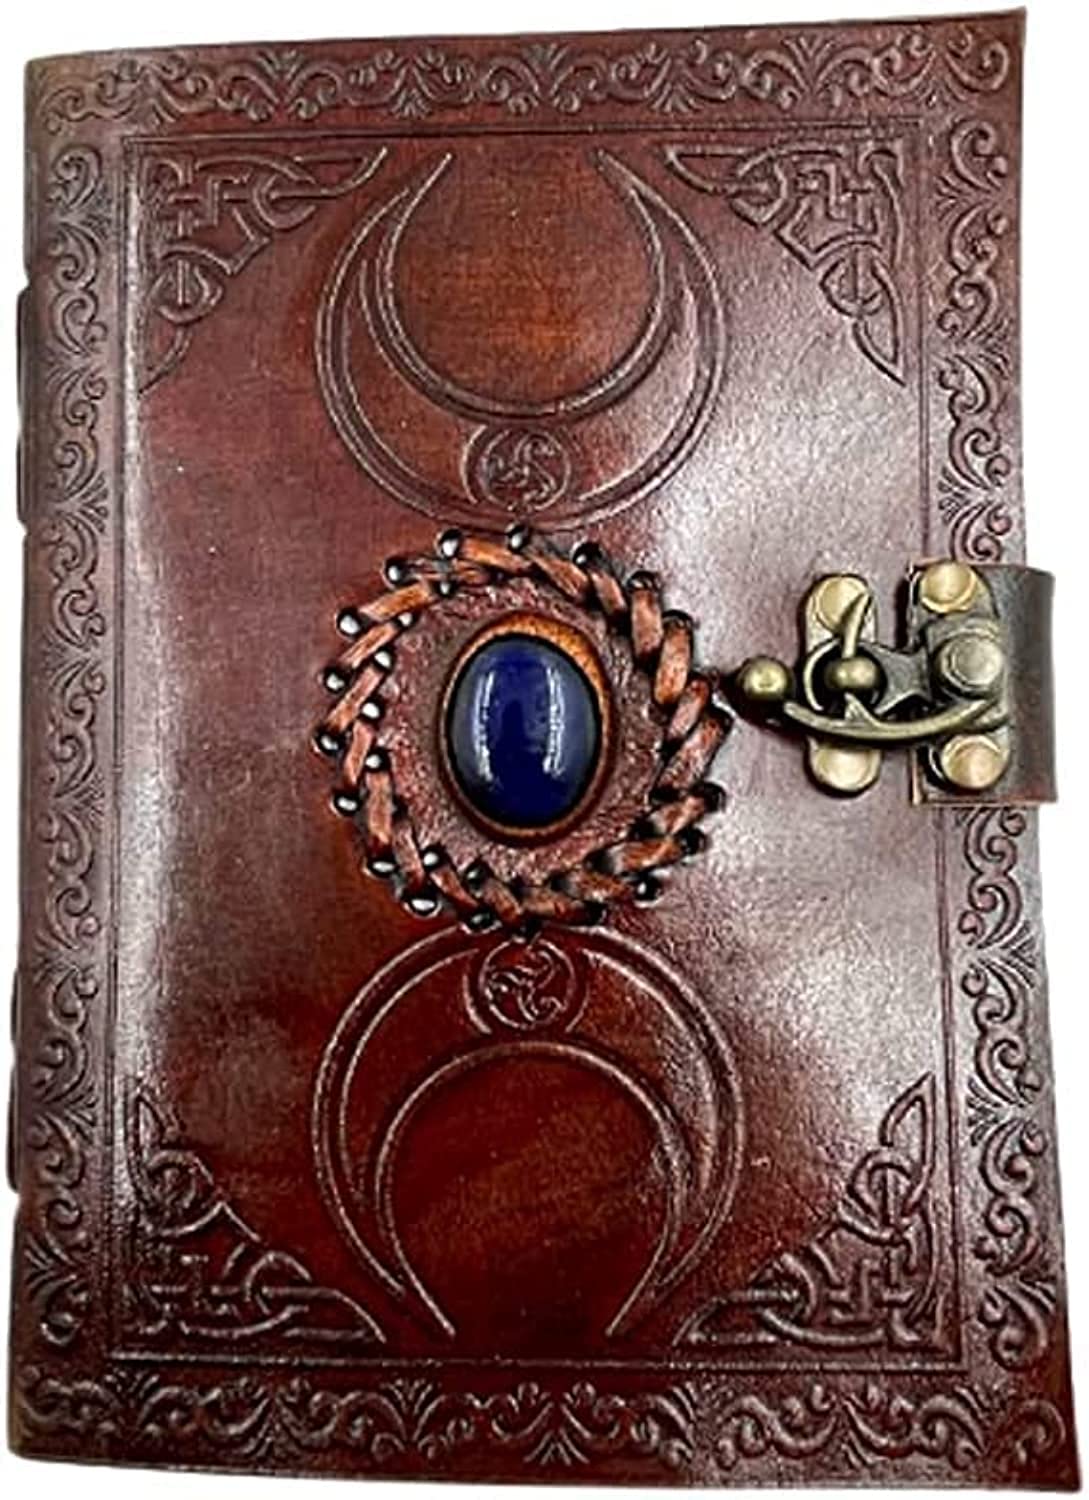 OVERDOSE Brown Moon Stone Leather Journal with Key - Antique Handmade Deckle Edge Vintage Paper Leather Bound Journal | Leather Sketchbook & Notebook - Drawing Journal - 12.7 cm x 17.8 cm